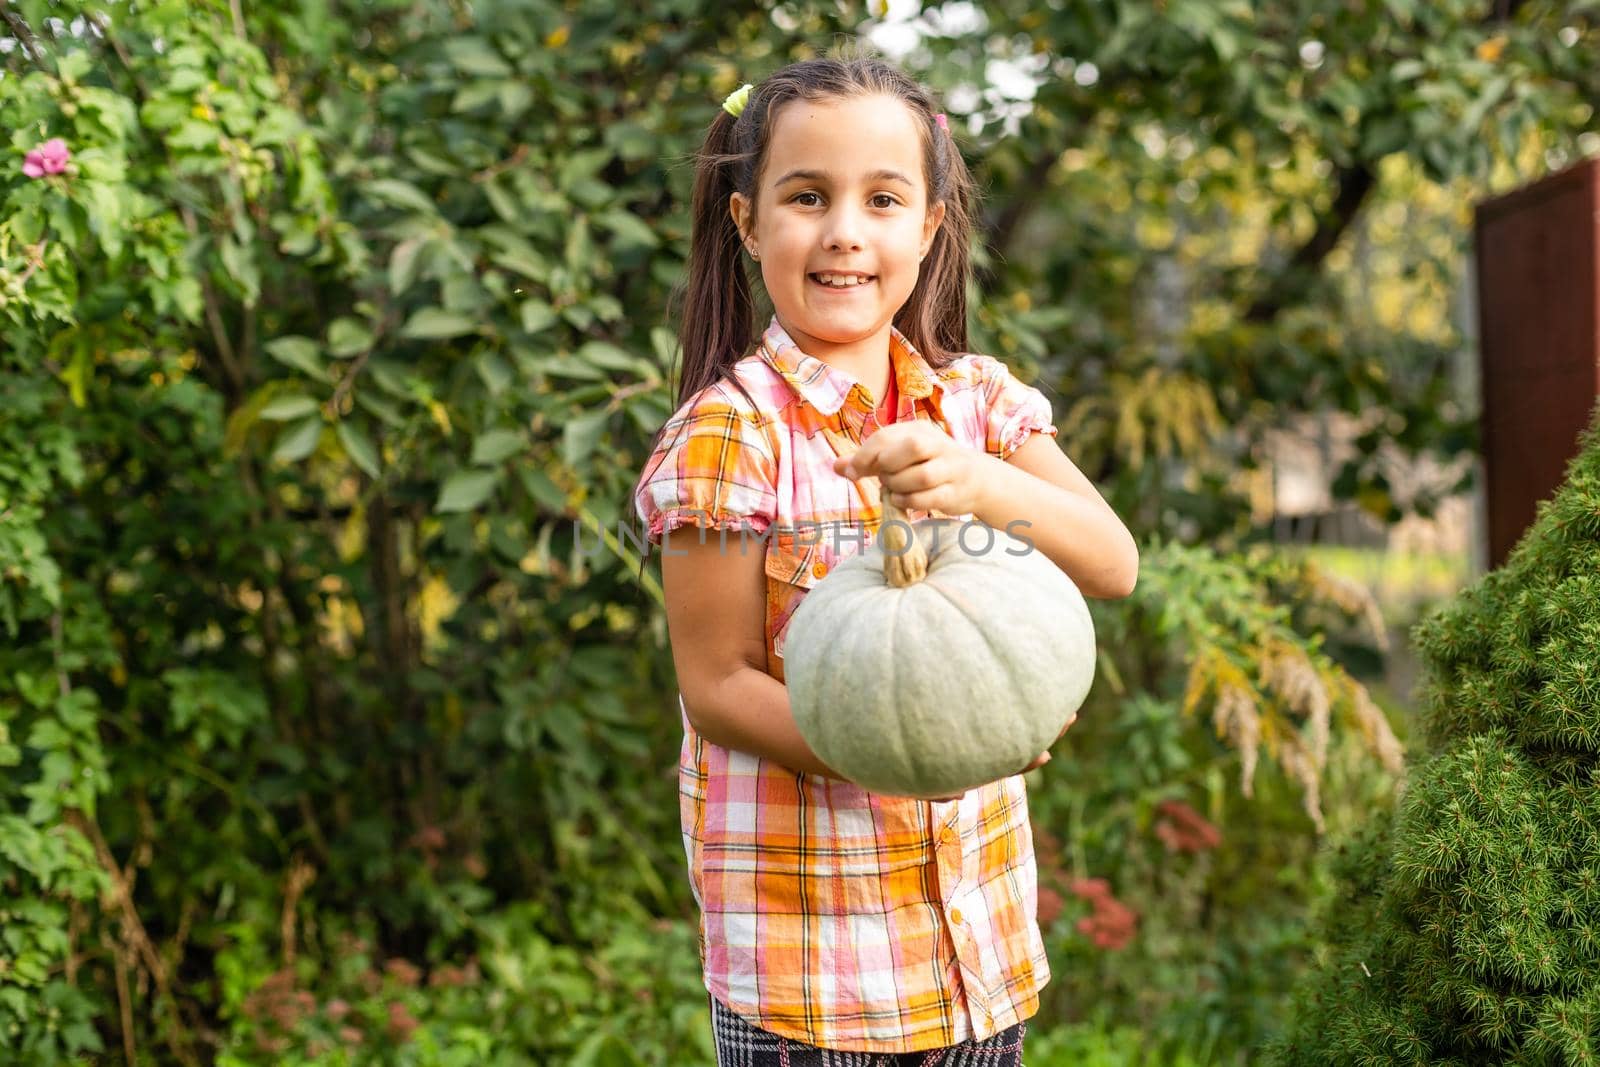 Playing outdoors cute little girl holding a pumpkin by Andelov13